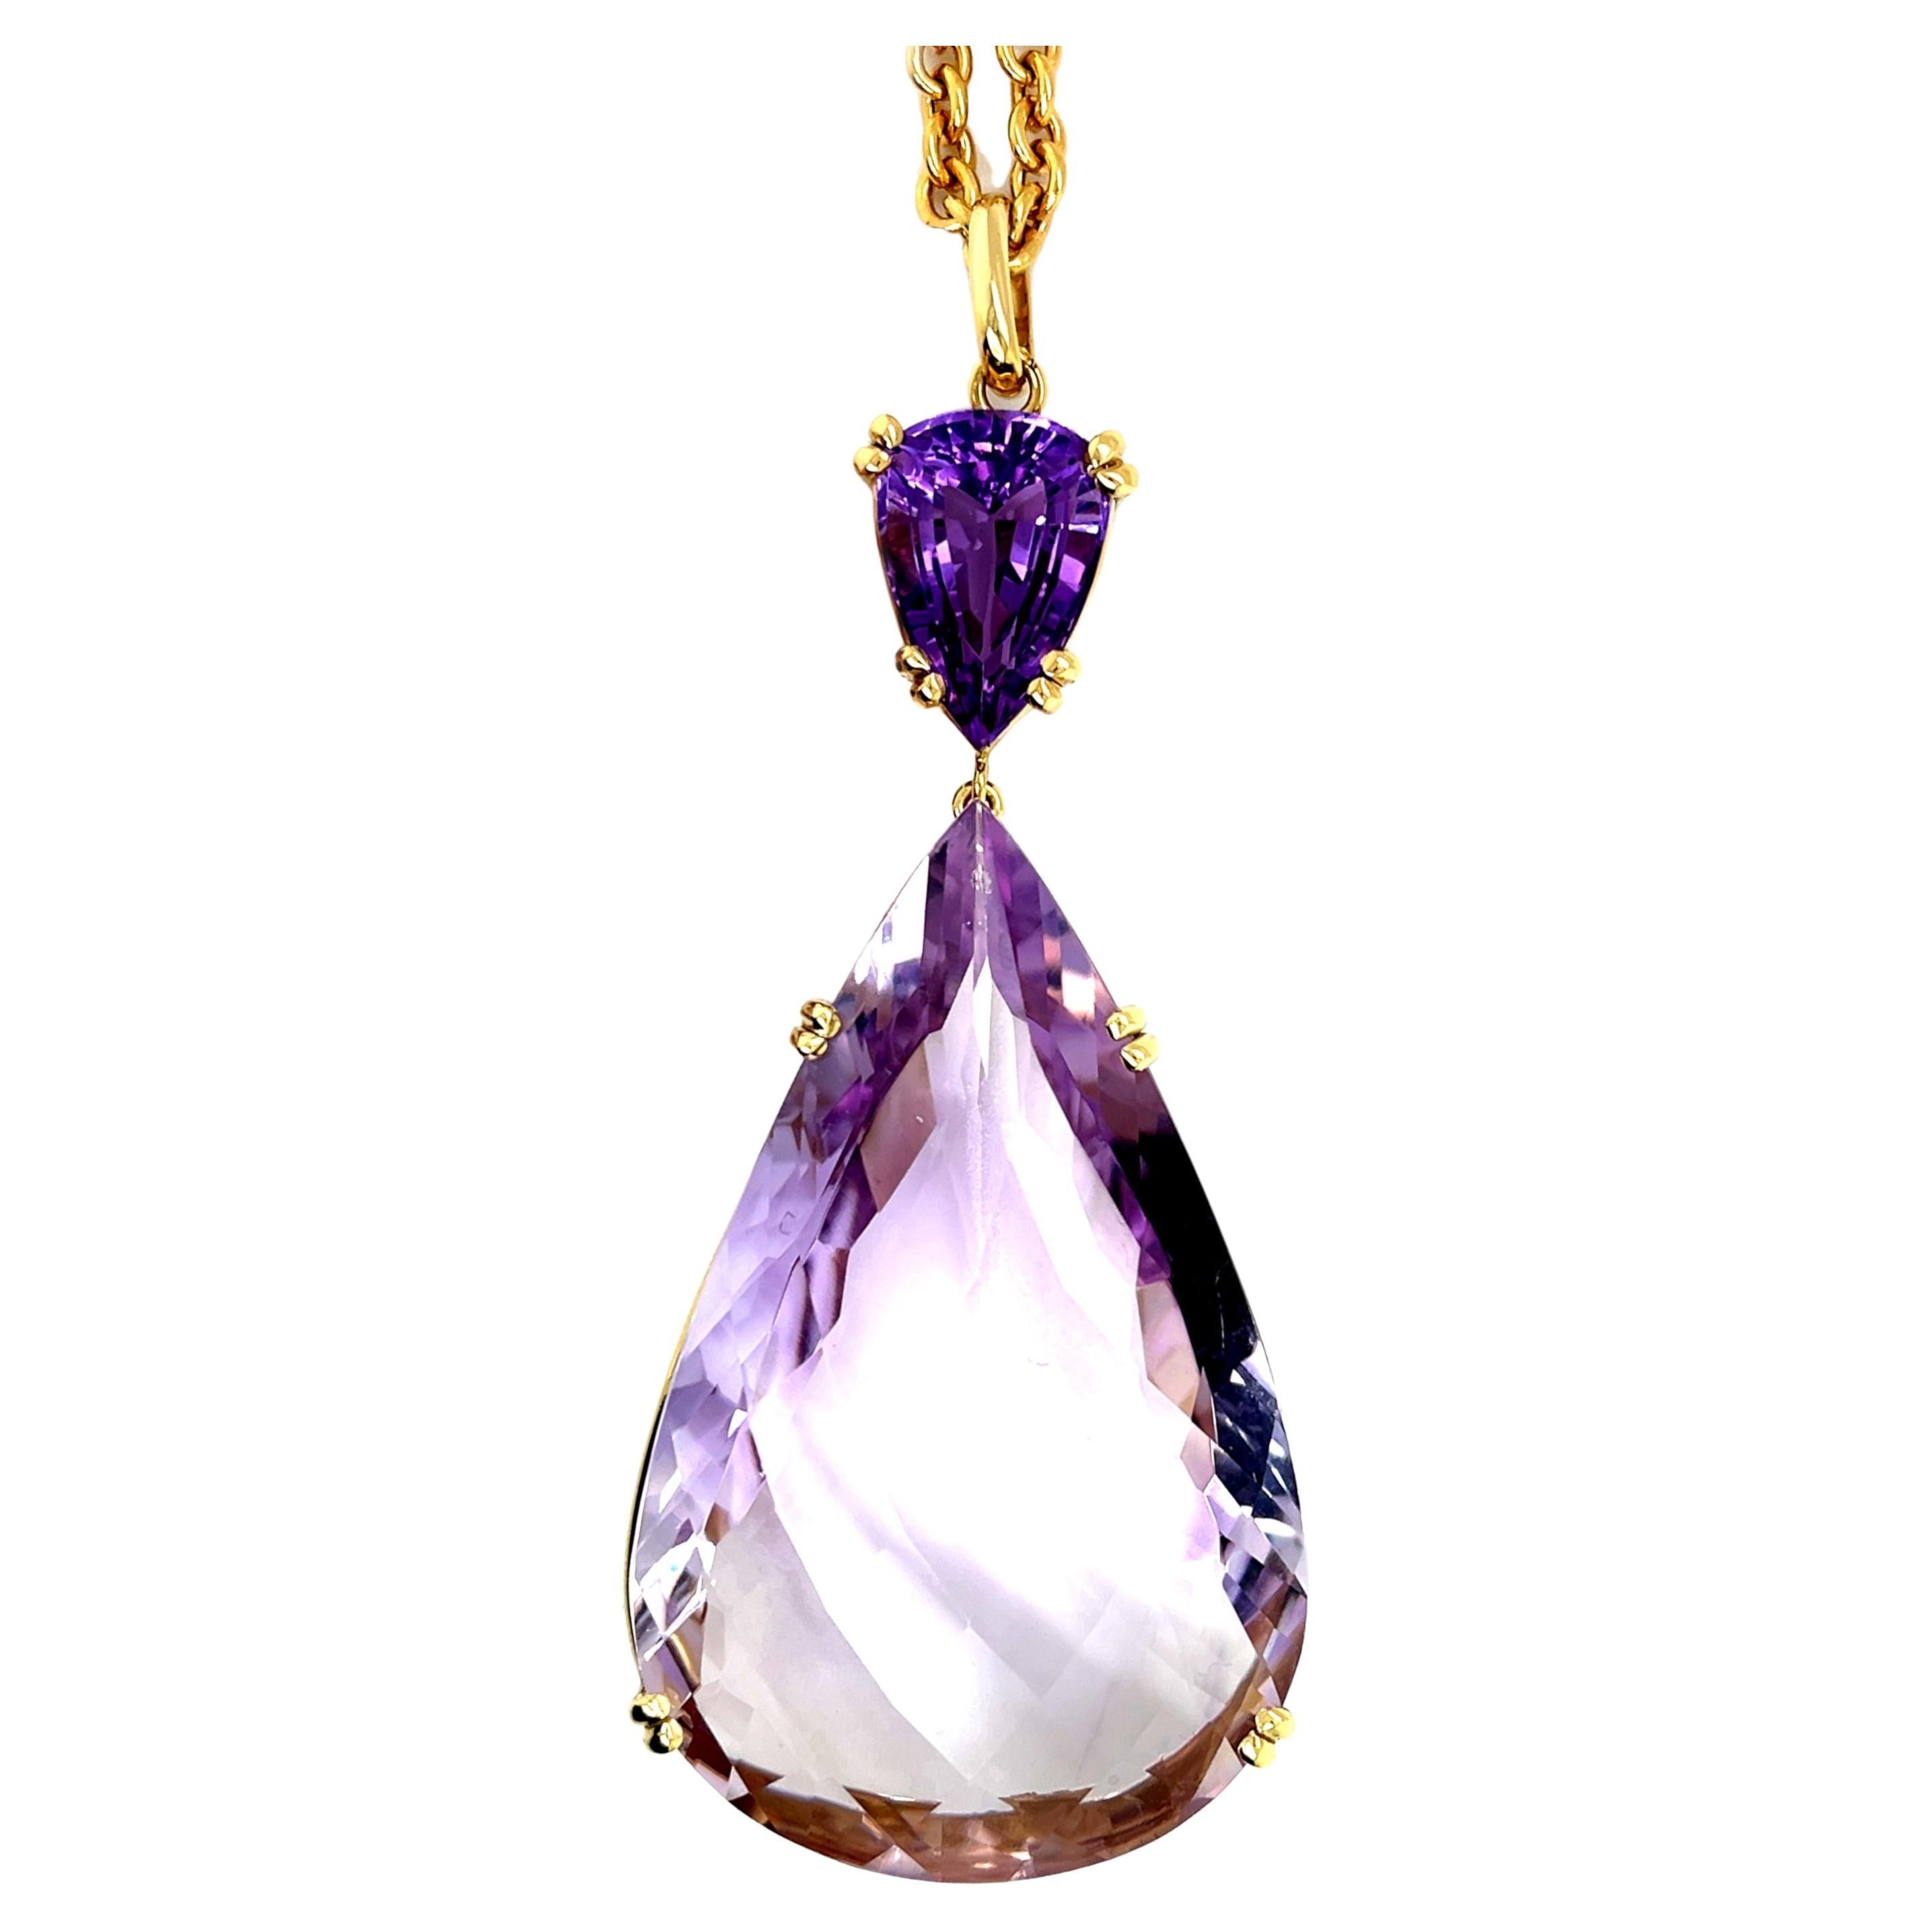 This spectacular pendant showcases a giant gemstone in one of the prettiest shades of amethyst - the soft and delicate, pastel pinkish purple aptly named, 